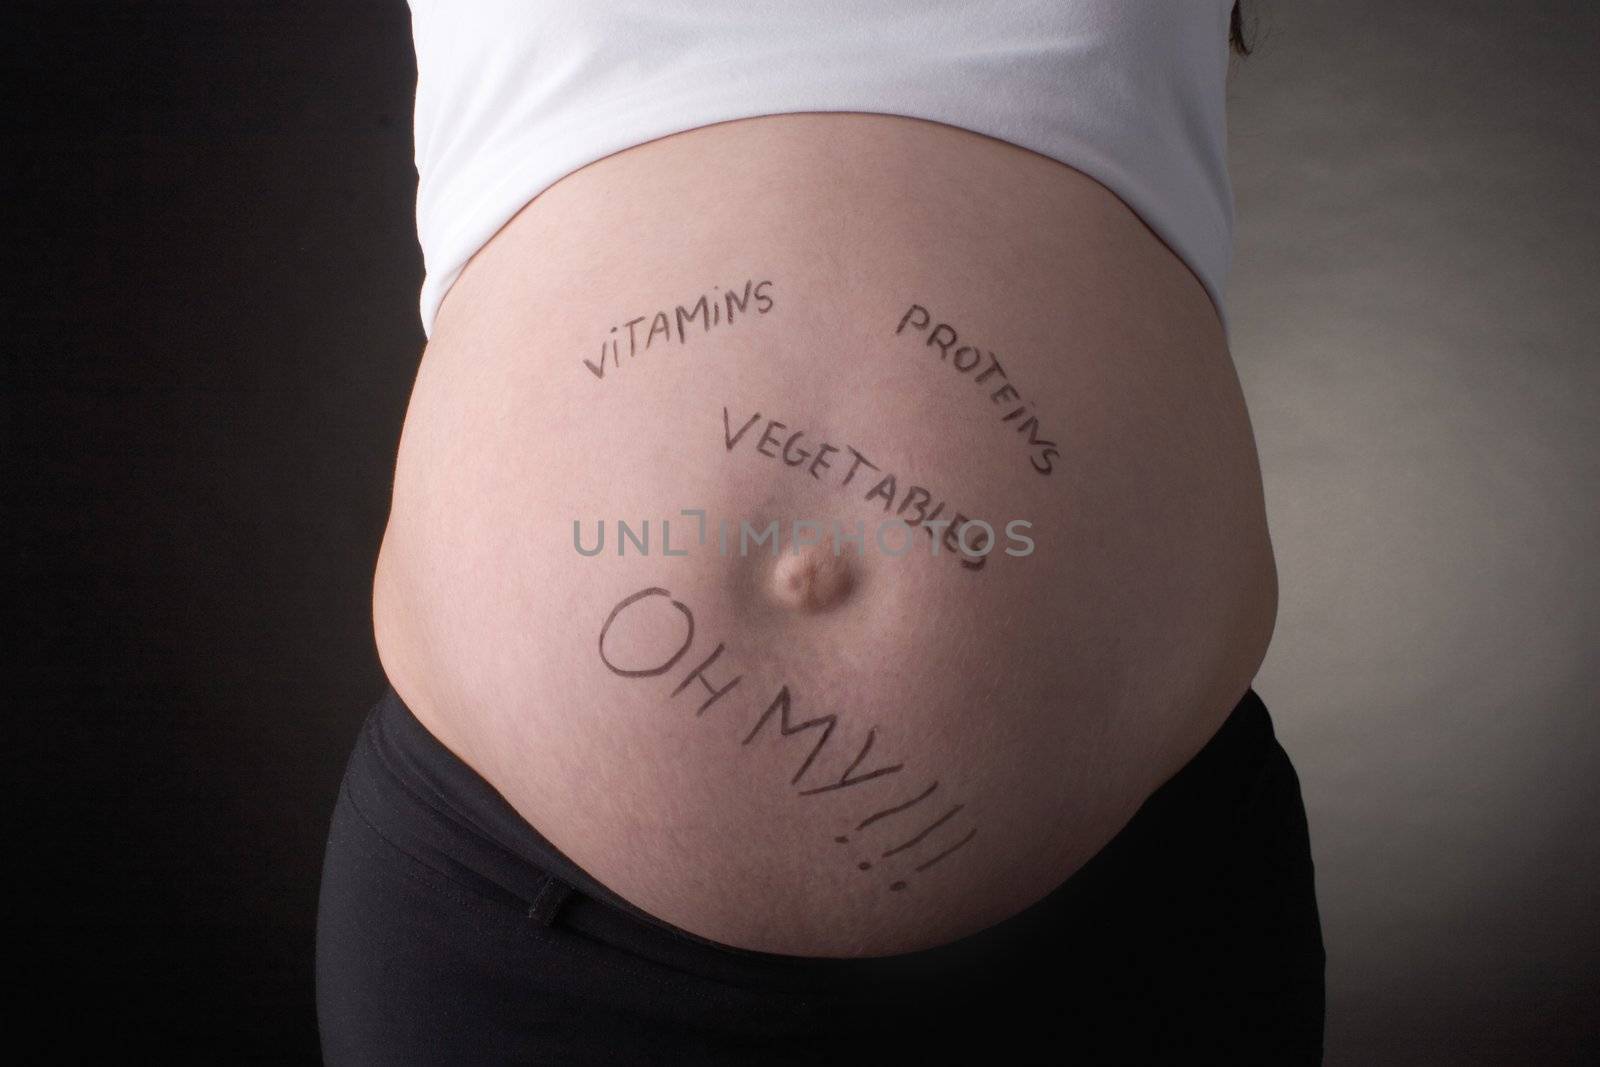 seven month pregnant belly with vitamines, proteins, vegetables, oh my written on stomach